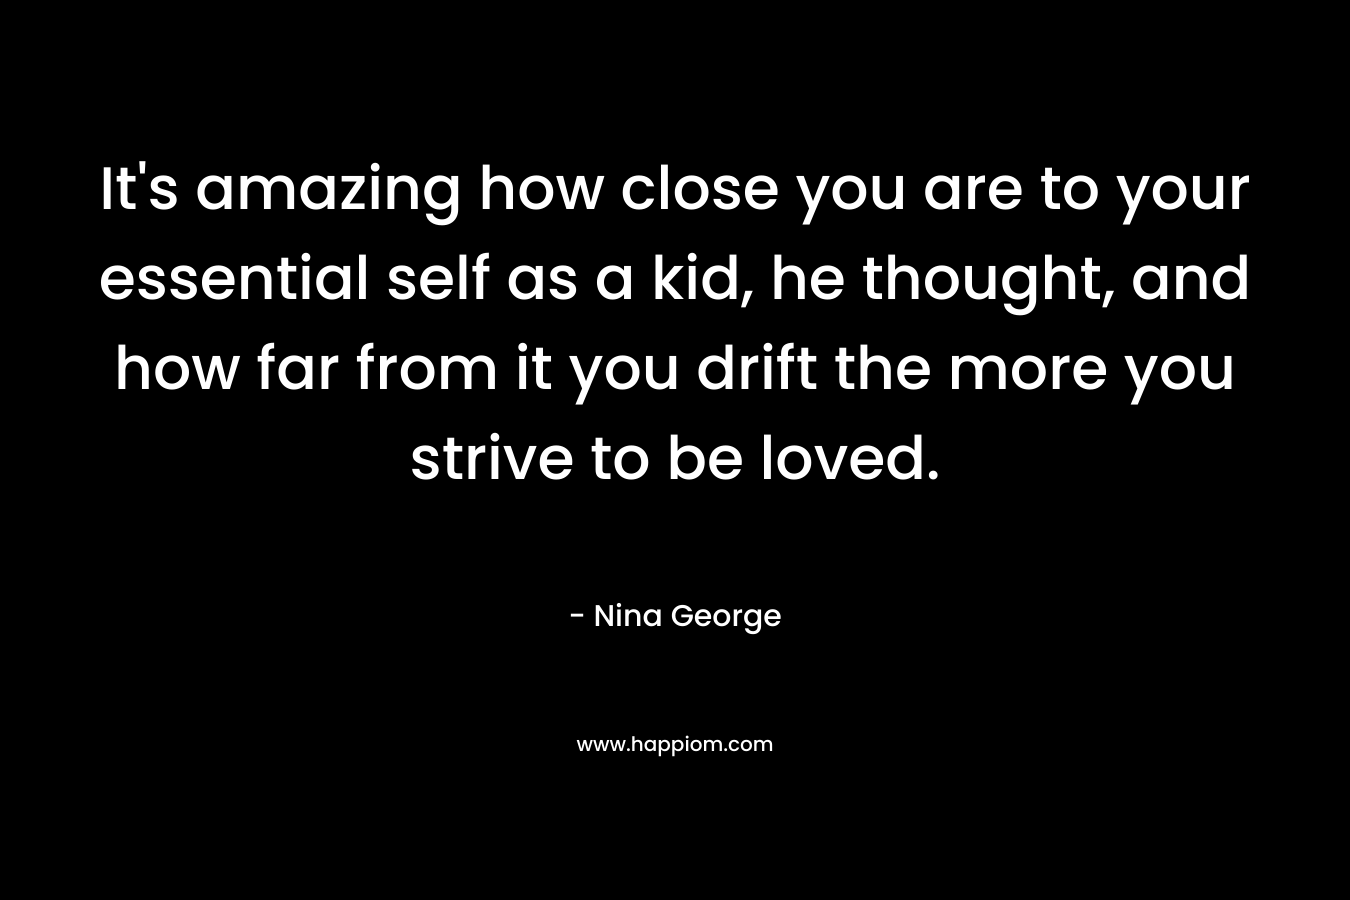 It’s amazing how close you are to your essential self as a kid, he thought, and how far from it you drift the more you strive to be loved. – Nina George